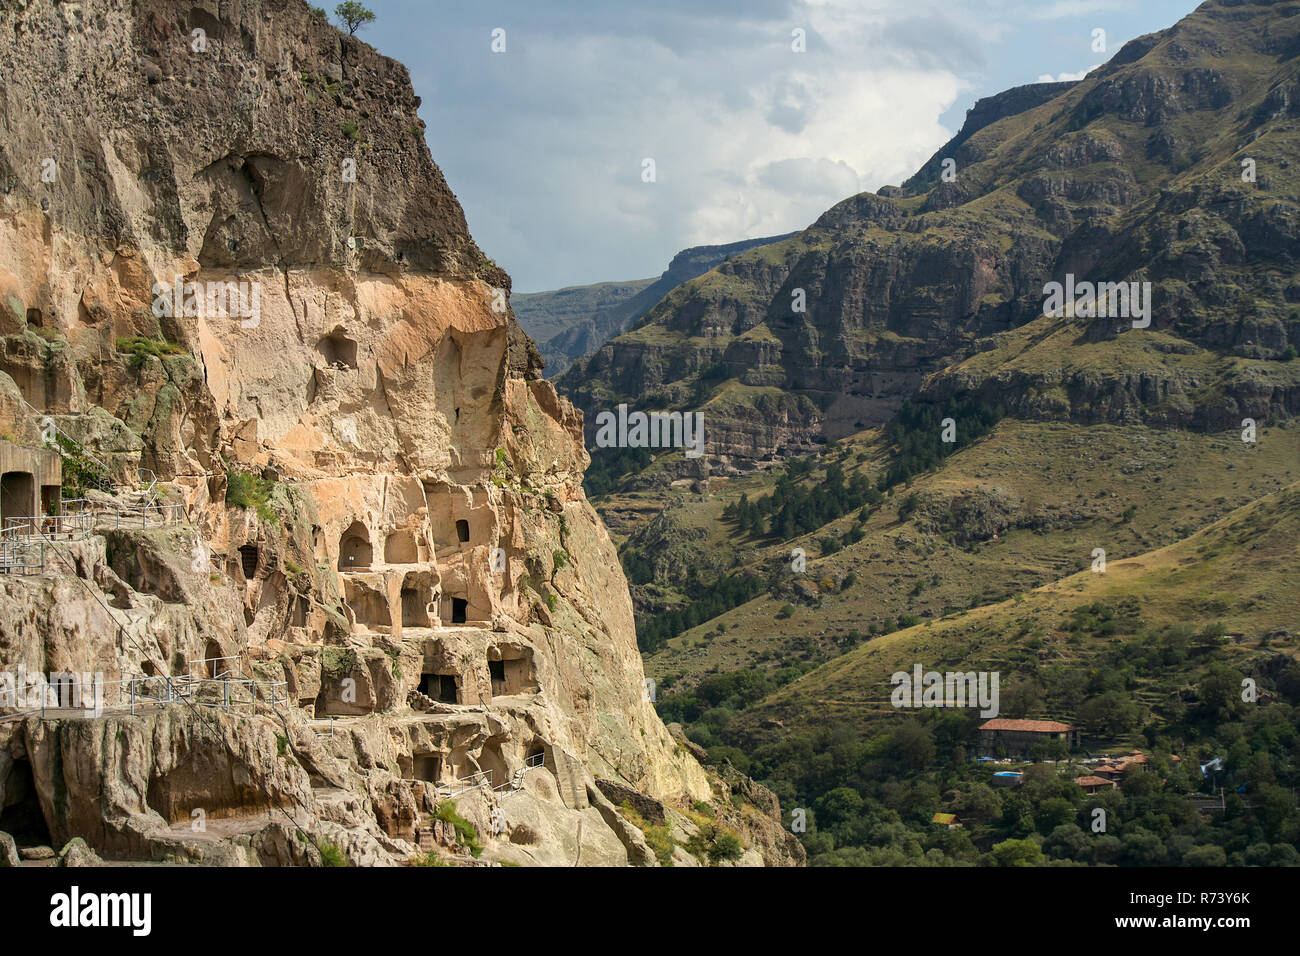 The 8th century Vardzia Cave City carved and chiseled in to the side of valley cliffs near the city of Akhaltsikhe, Georgia. Stock Photo